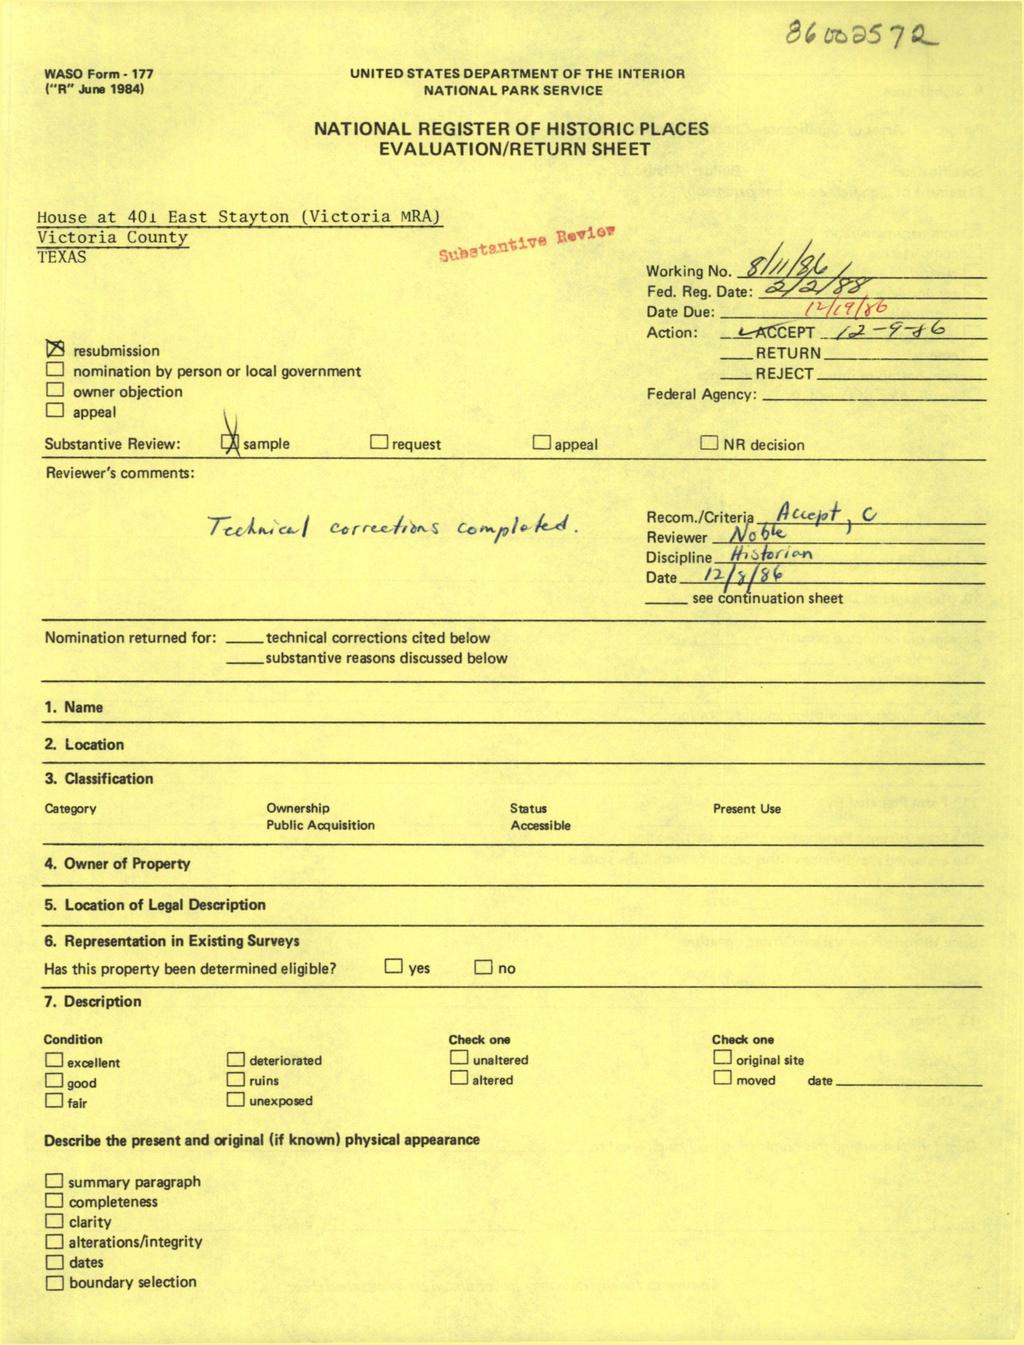 WASO Form - 177 ("R" June 1984) UNITED STATES DEPARTMENT OF THE INTERIOR NATIONAL PARK SERVICE NATIONAL REGISTER OF HISTORIC PLACES EVALUATION/RETURN SHEET House at 40i East Stayton (.